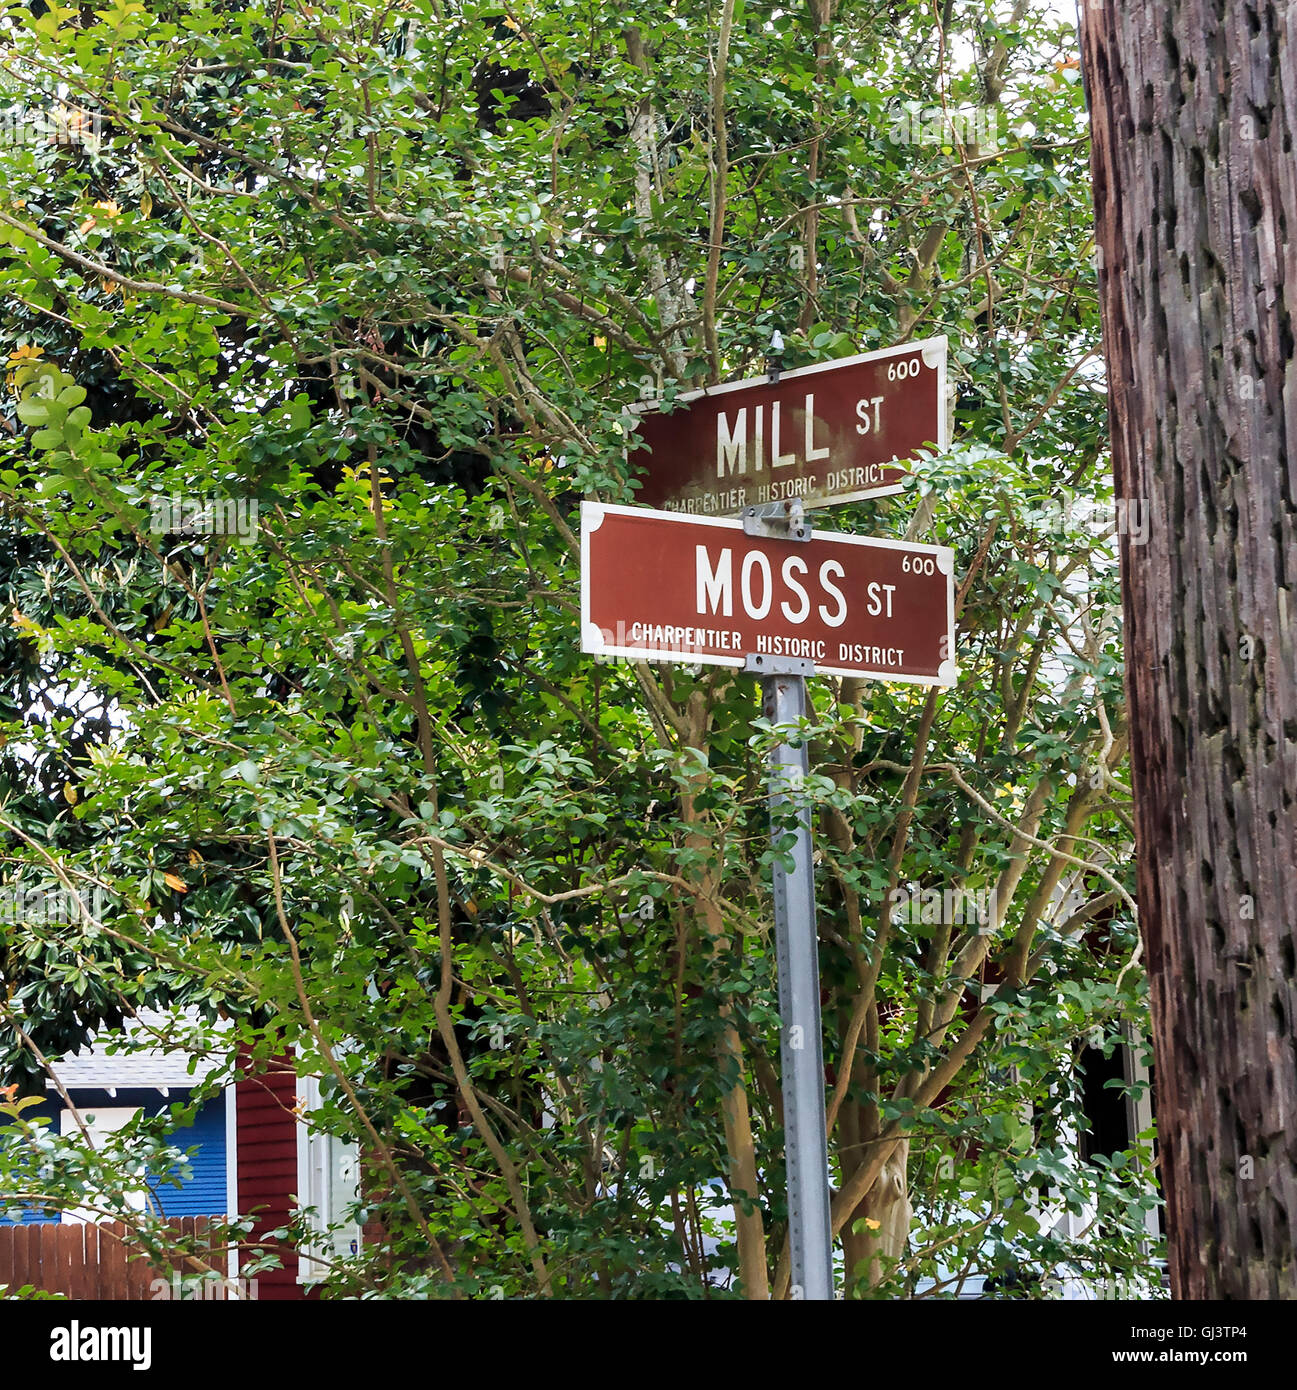 Street signs in the Lake Charles downtown historic district are brown to distinguish them from the usual green street signs Stock Photo